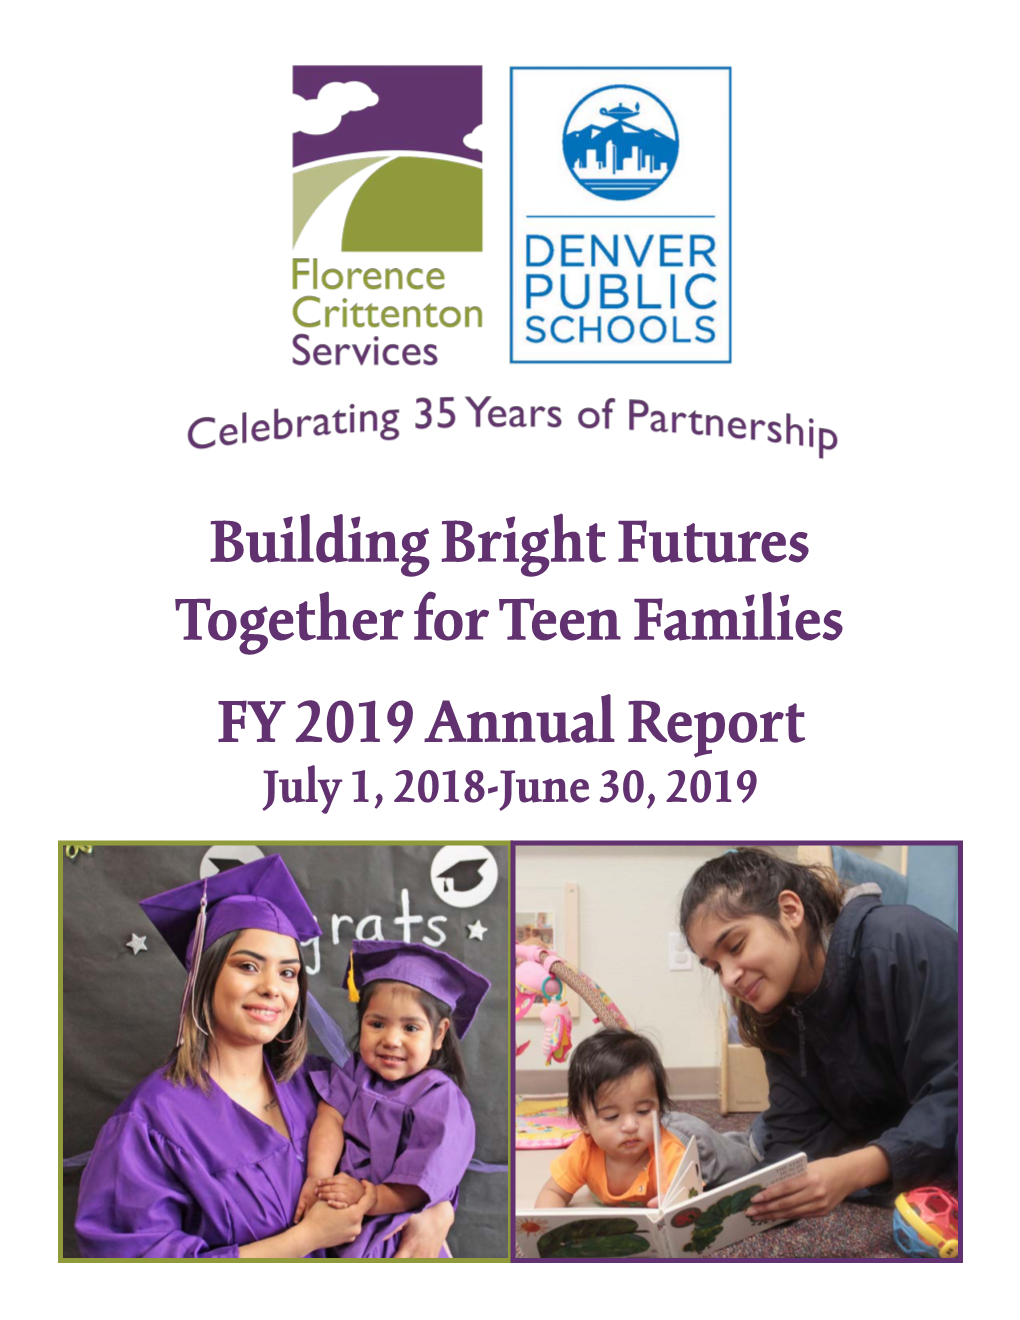 FY 2019 Annual Report Building Bright Futures Together for Teen